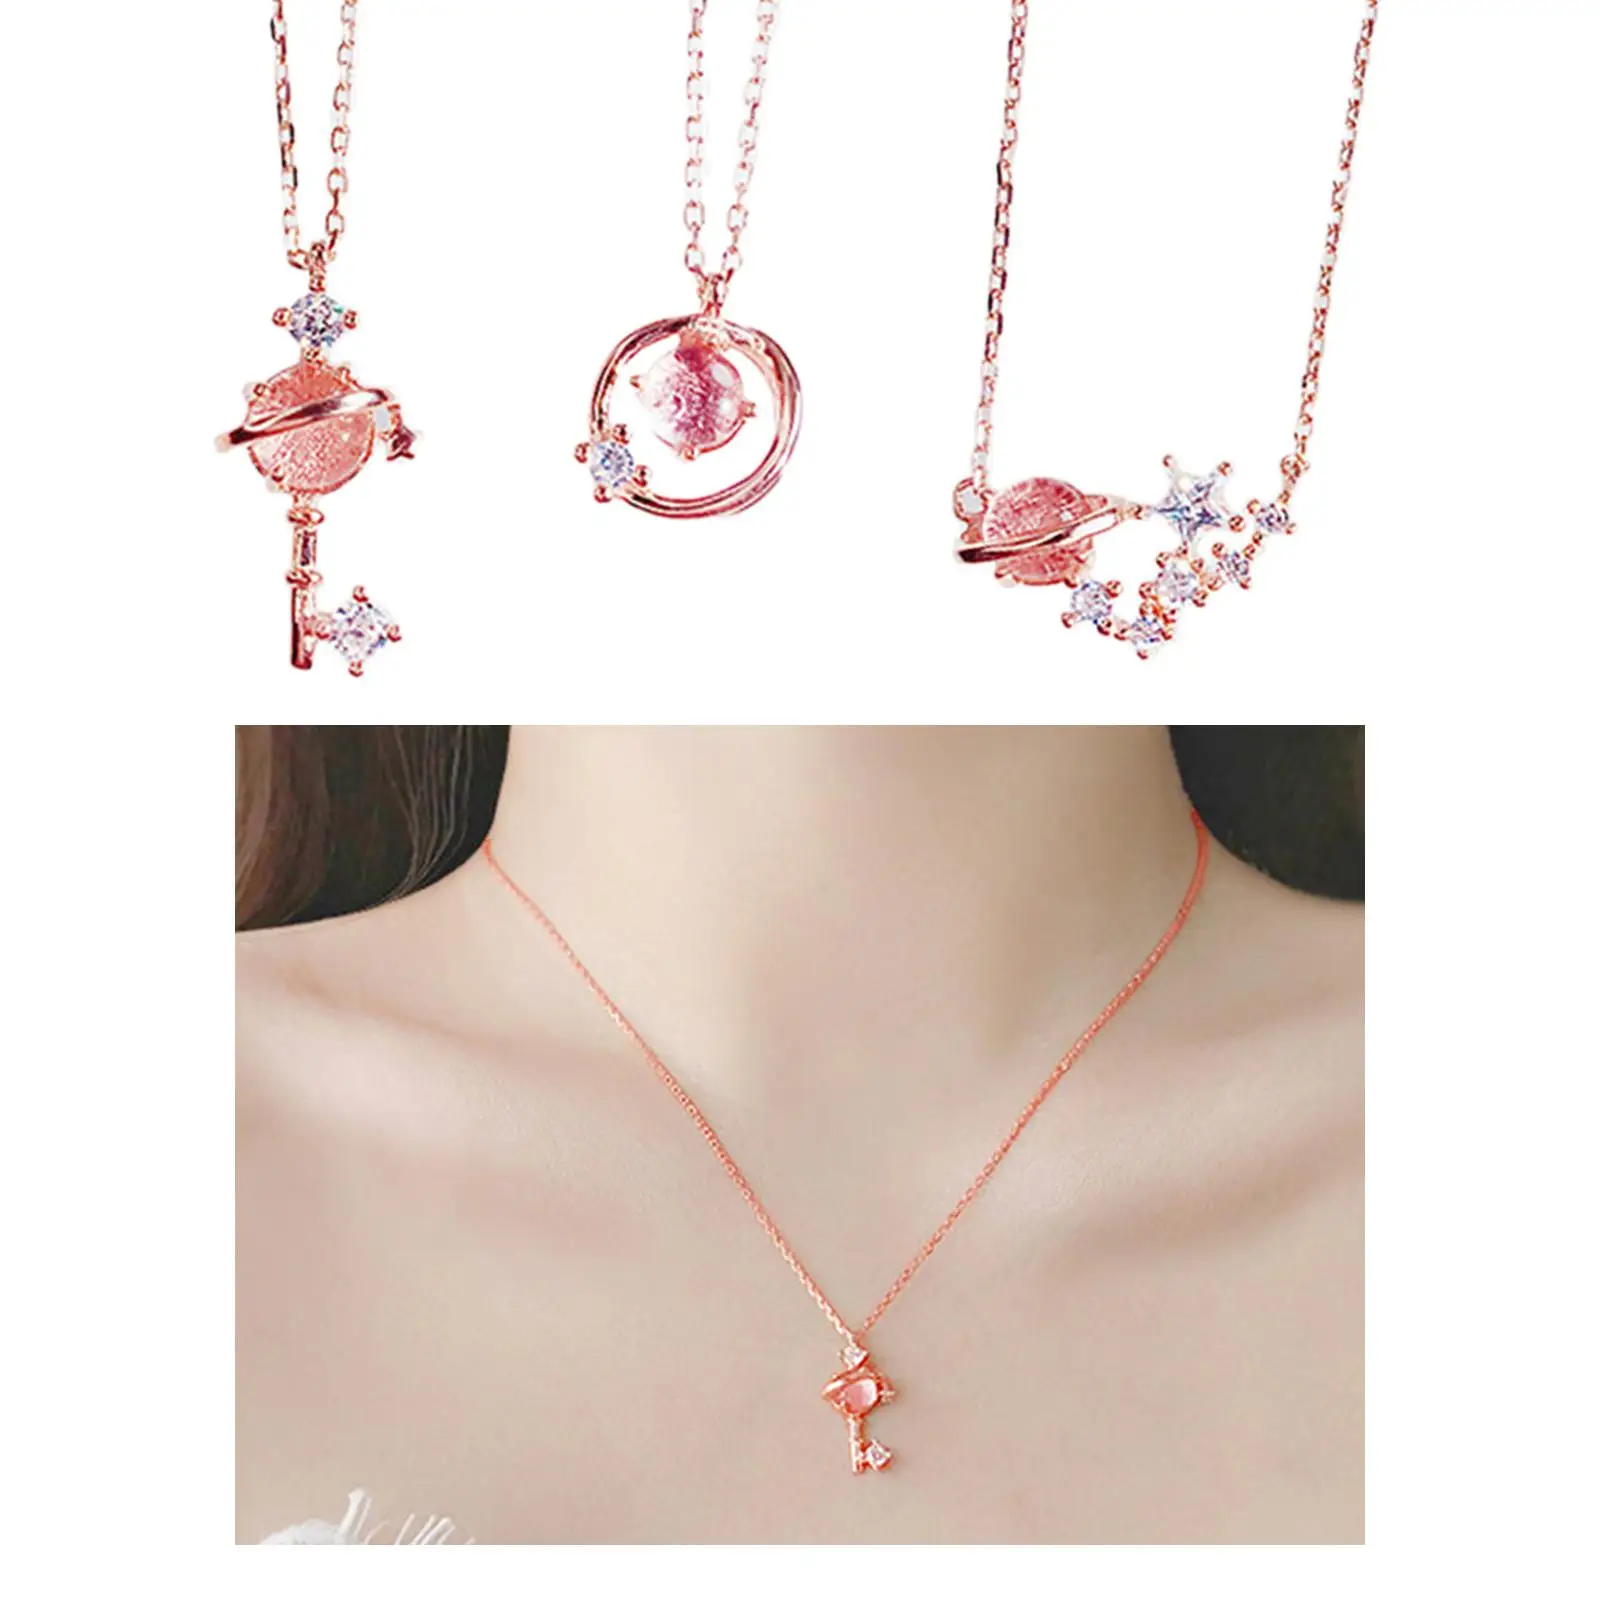 3 pieces Crystal Pendant Earth Stars Moon Natural Pendulum Clavicle Chain Temperament Necklace Chain Jewelry Gifts Women